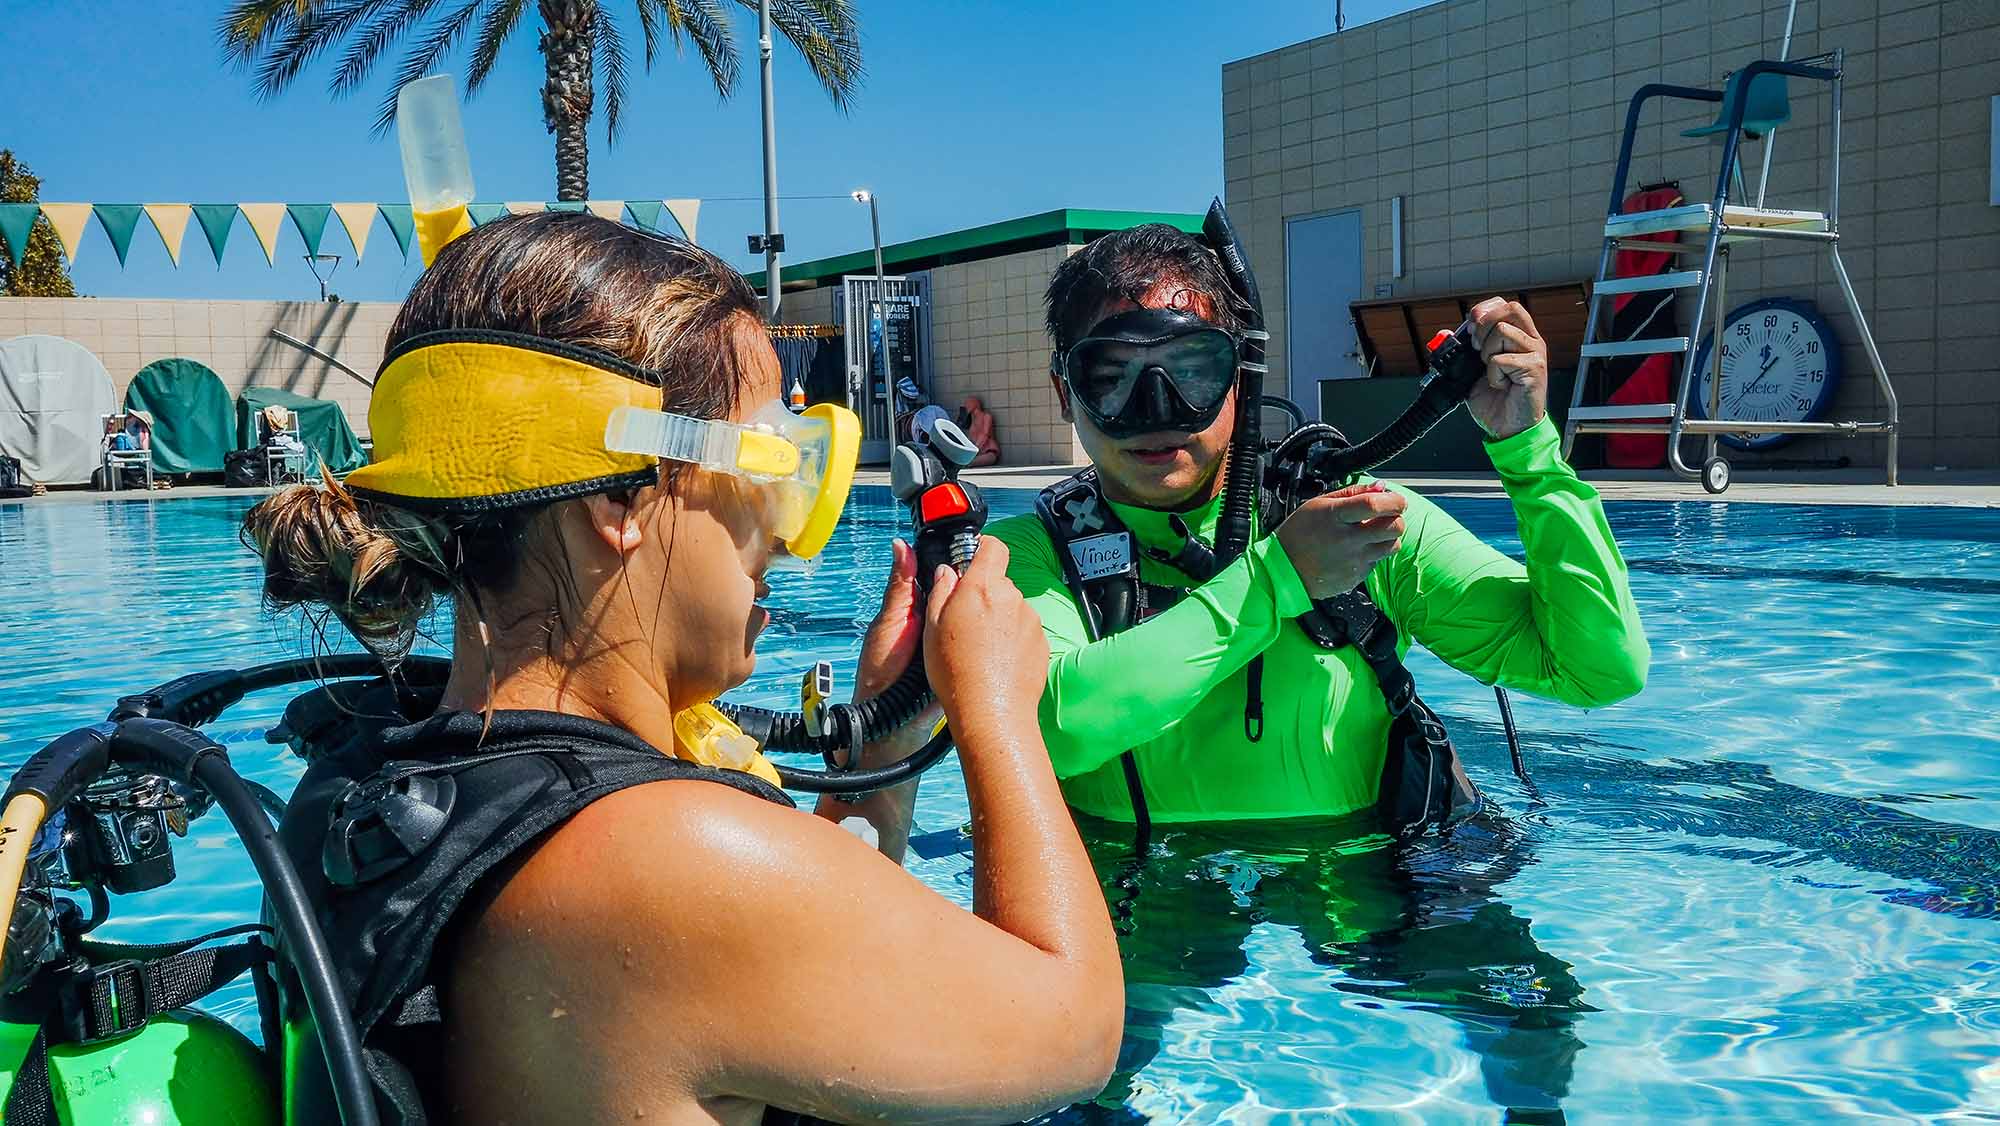 scuba diving instructor teaching a student how to use scuba gear in a swimming pool